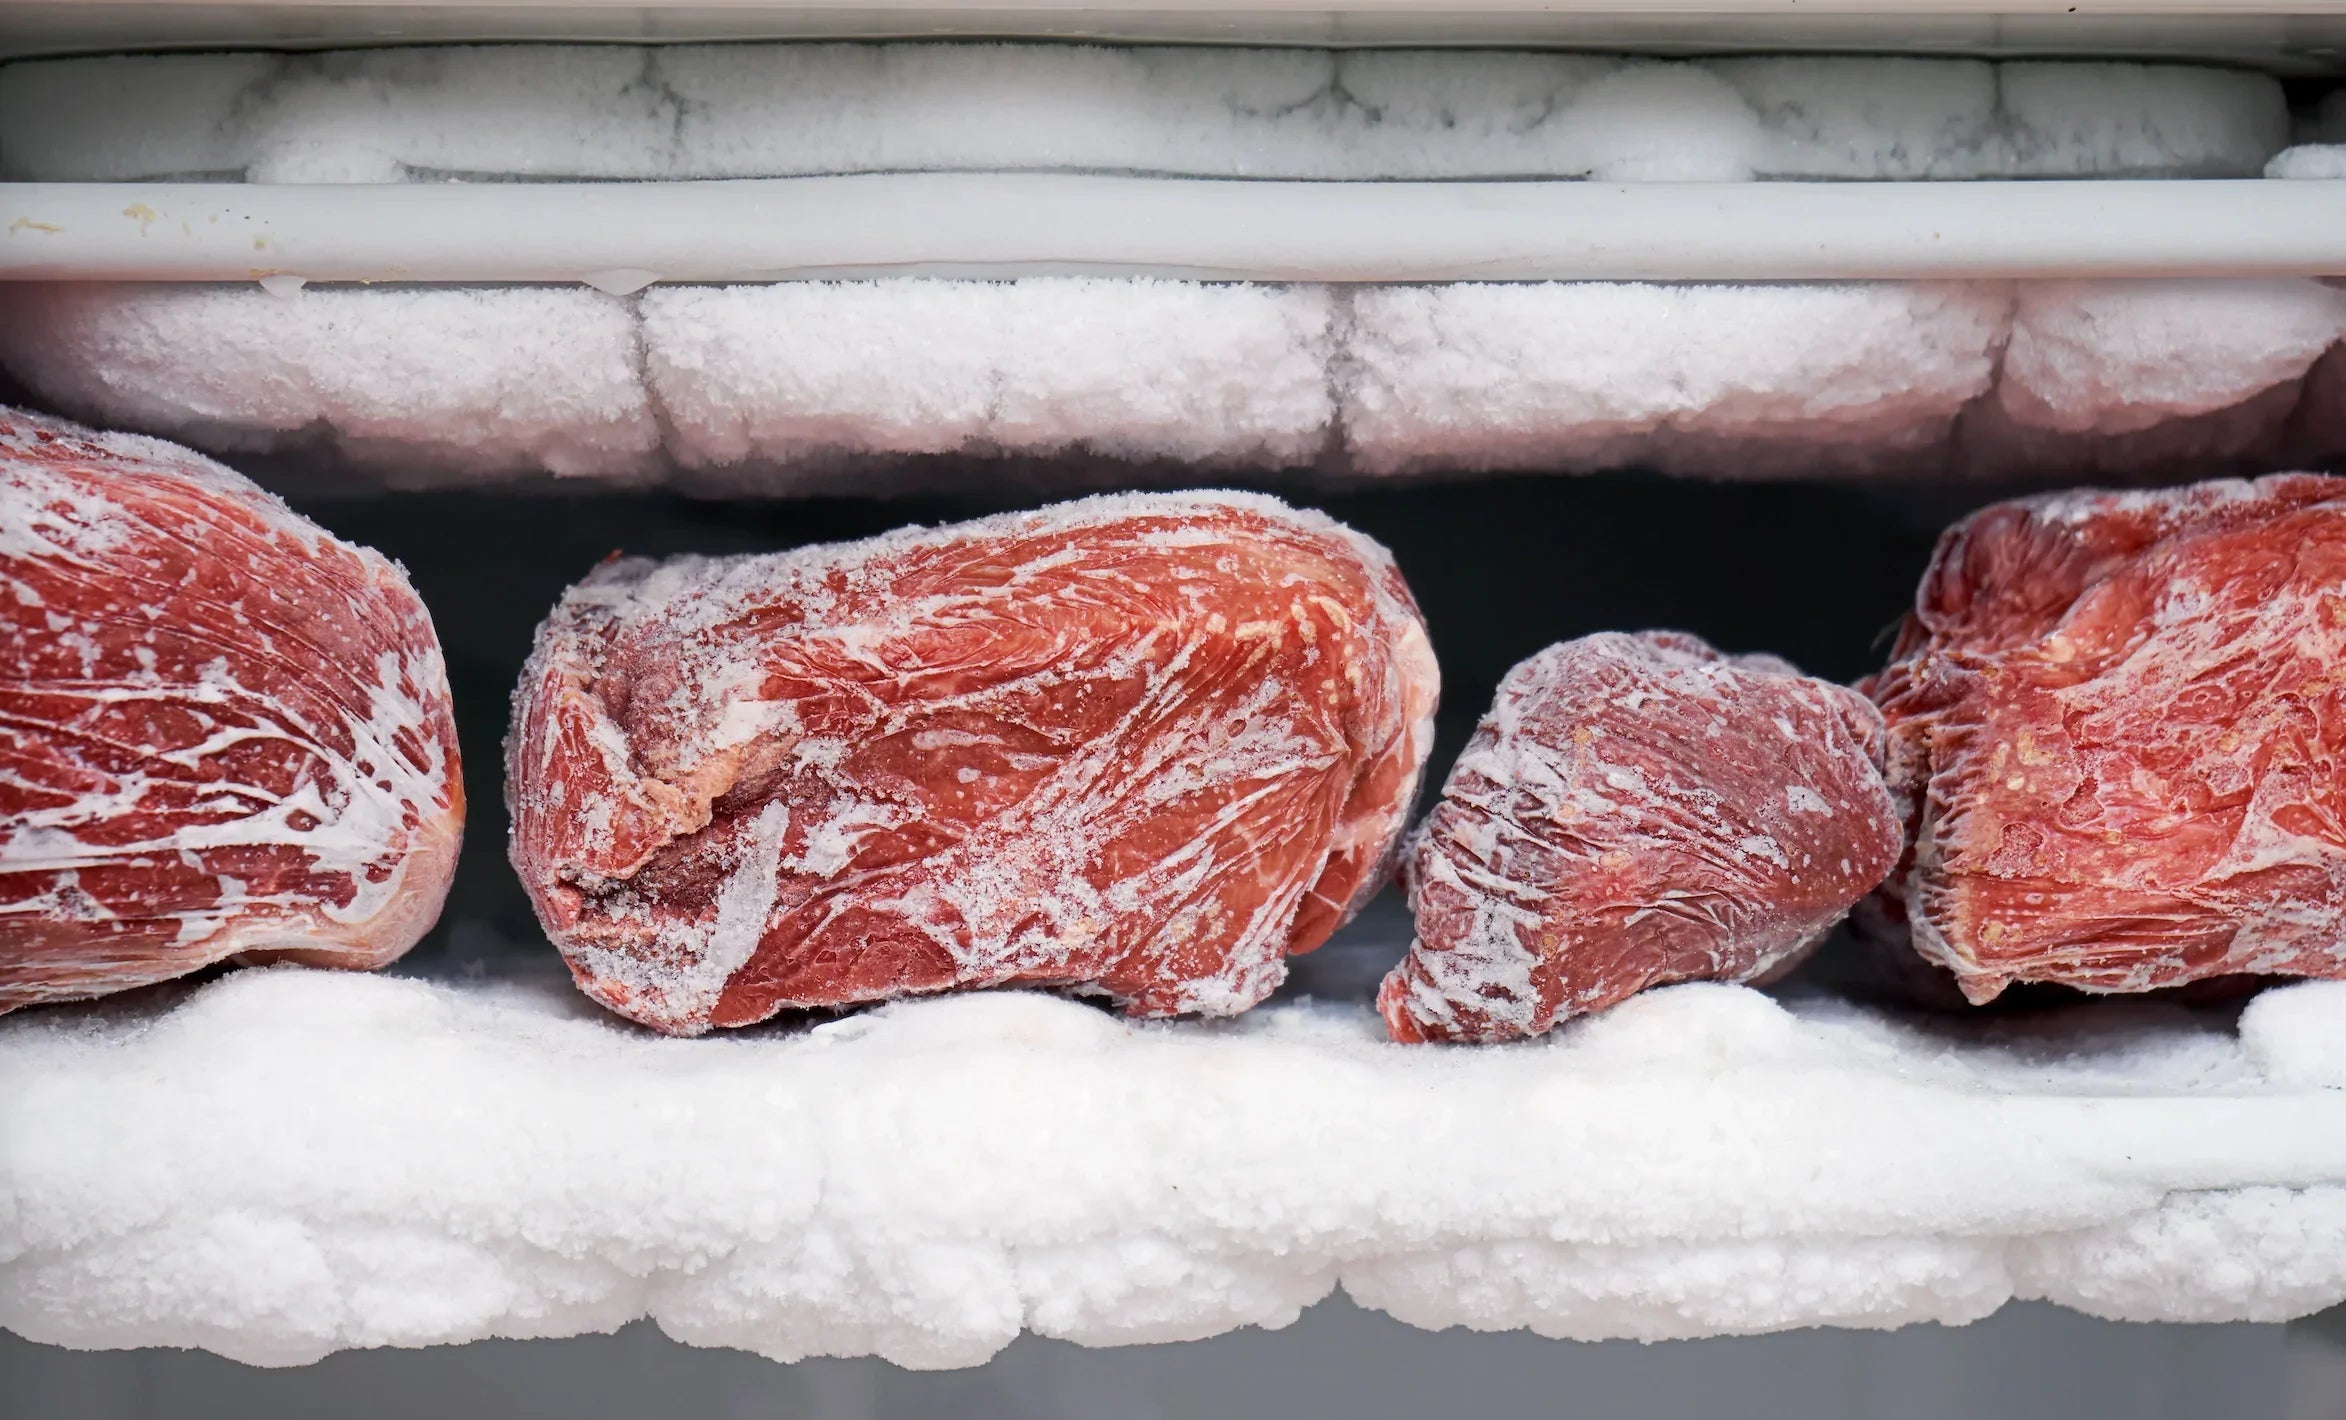 So, I bought a freezer beef, how much meat do I get? 